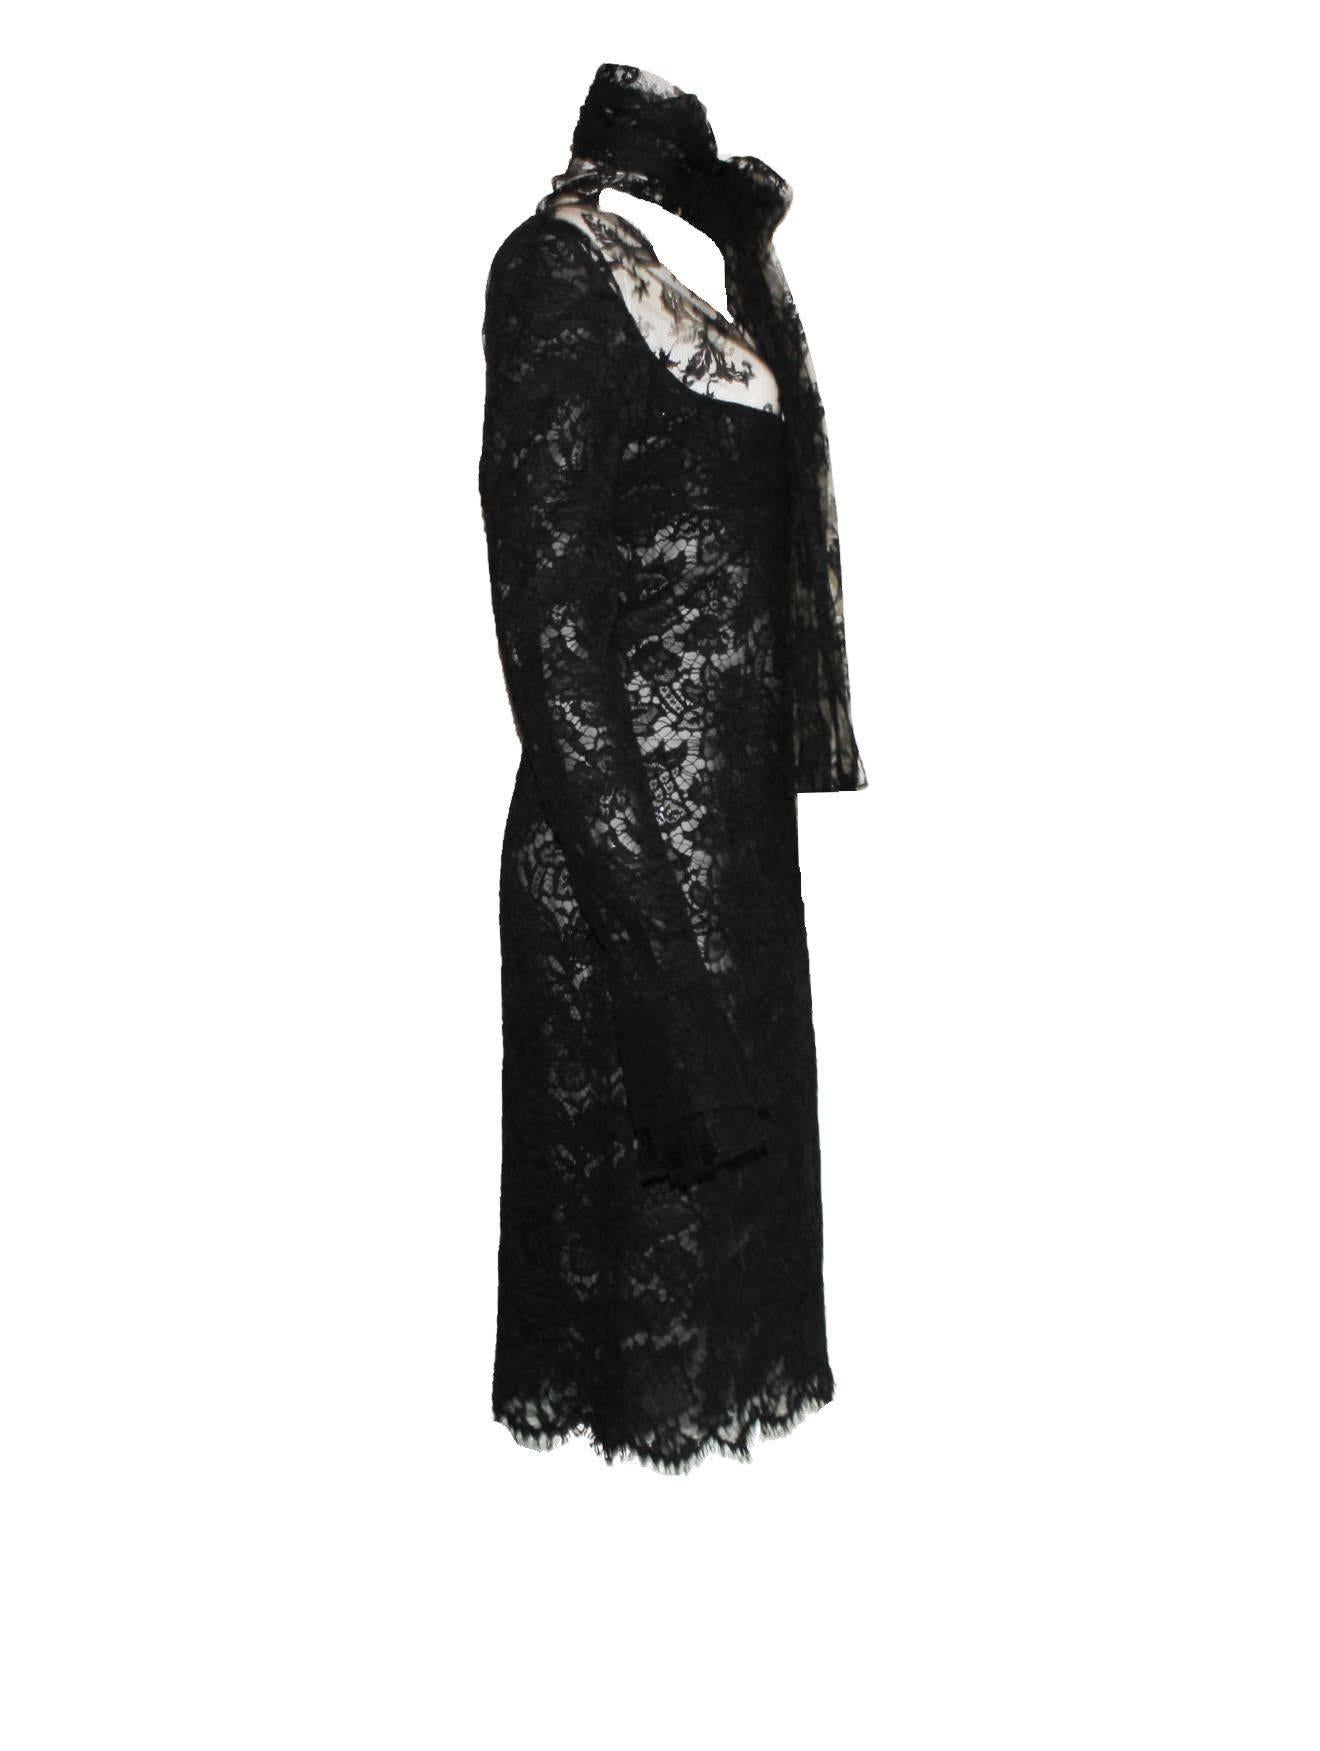 Lace dress designed by Tom Ford for Yves Saint Laurent 
FW 2002 Collection
Rare piece
Finest black guipure lace 
Lined on backside with black mesh tulle
Seen on the AD campaign, on the runway and on Carine Roitfeld
One of Tom Ford's most famous